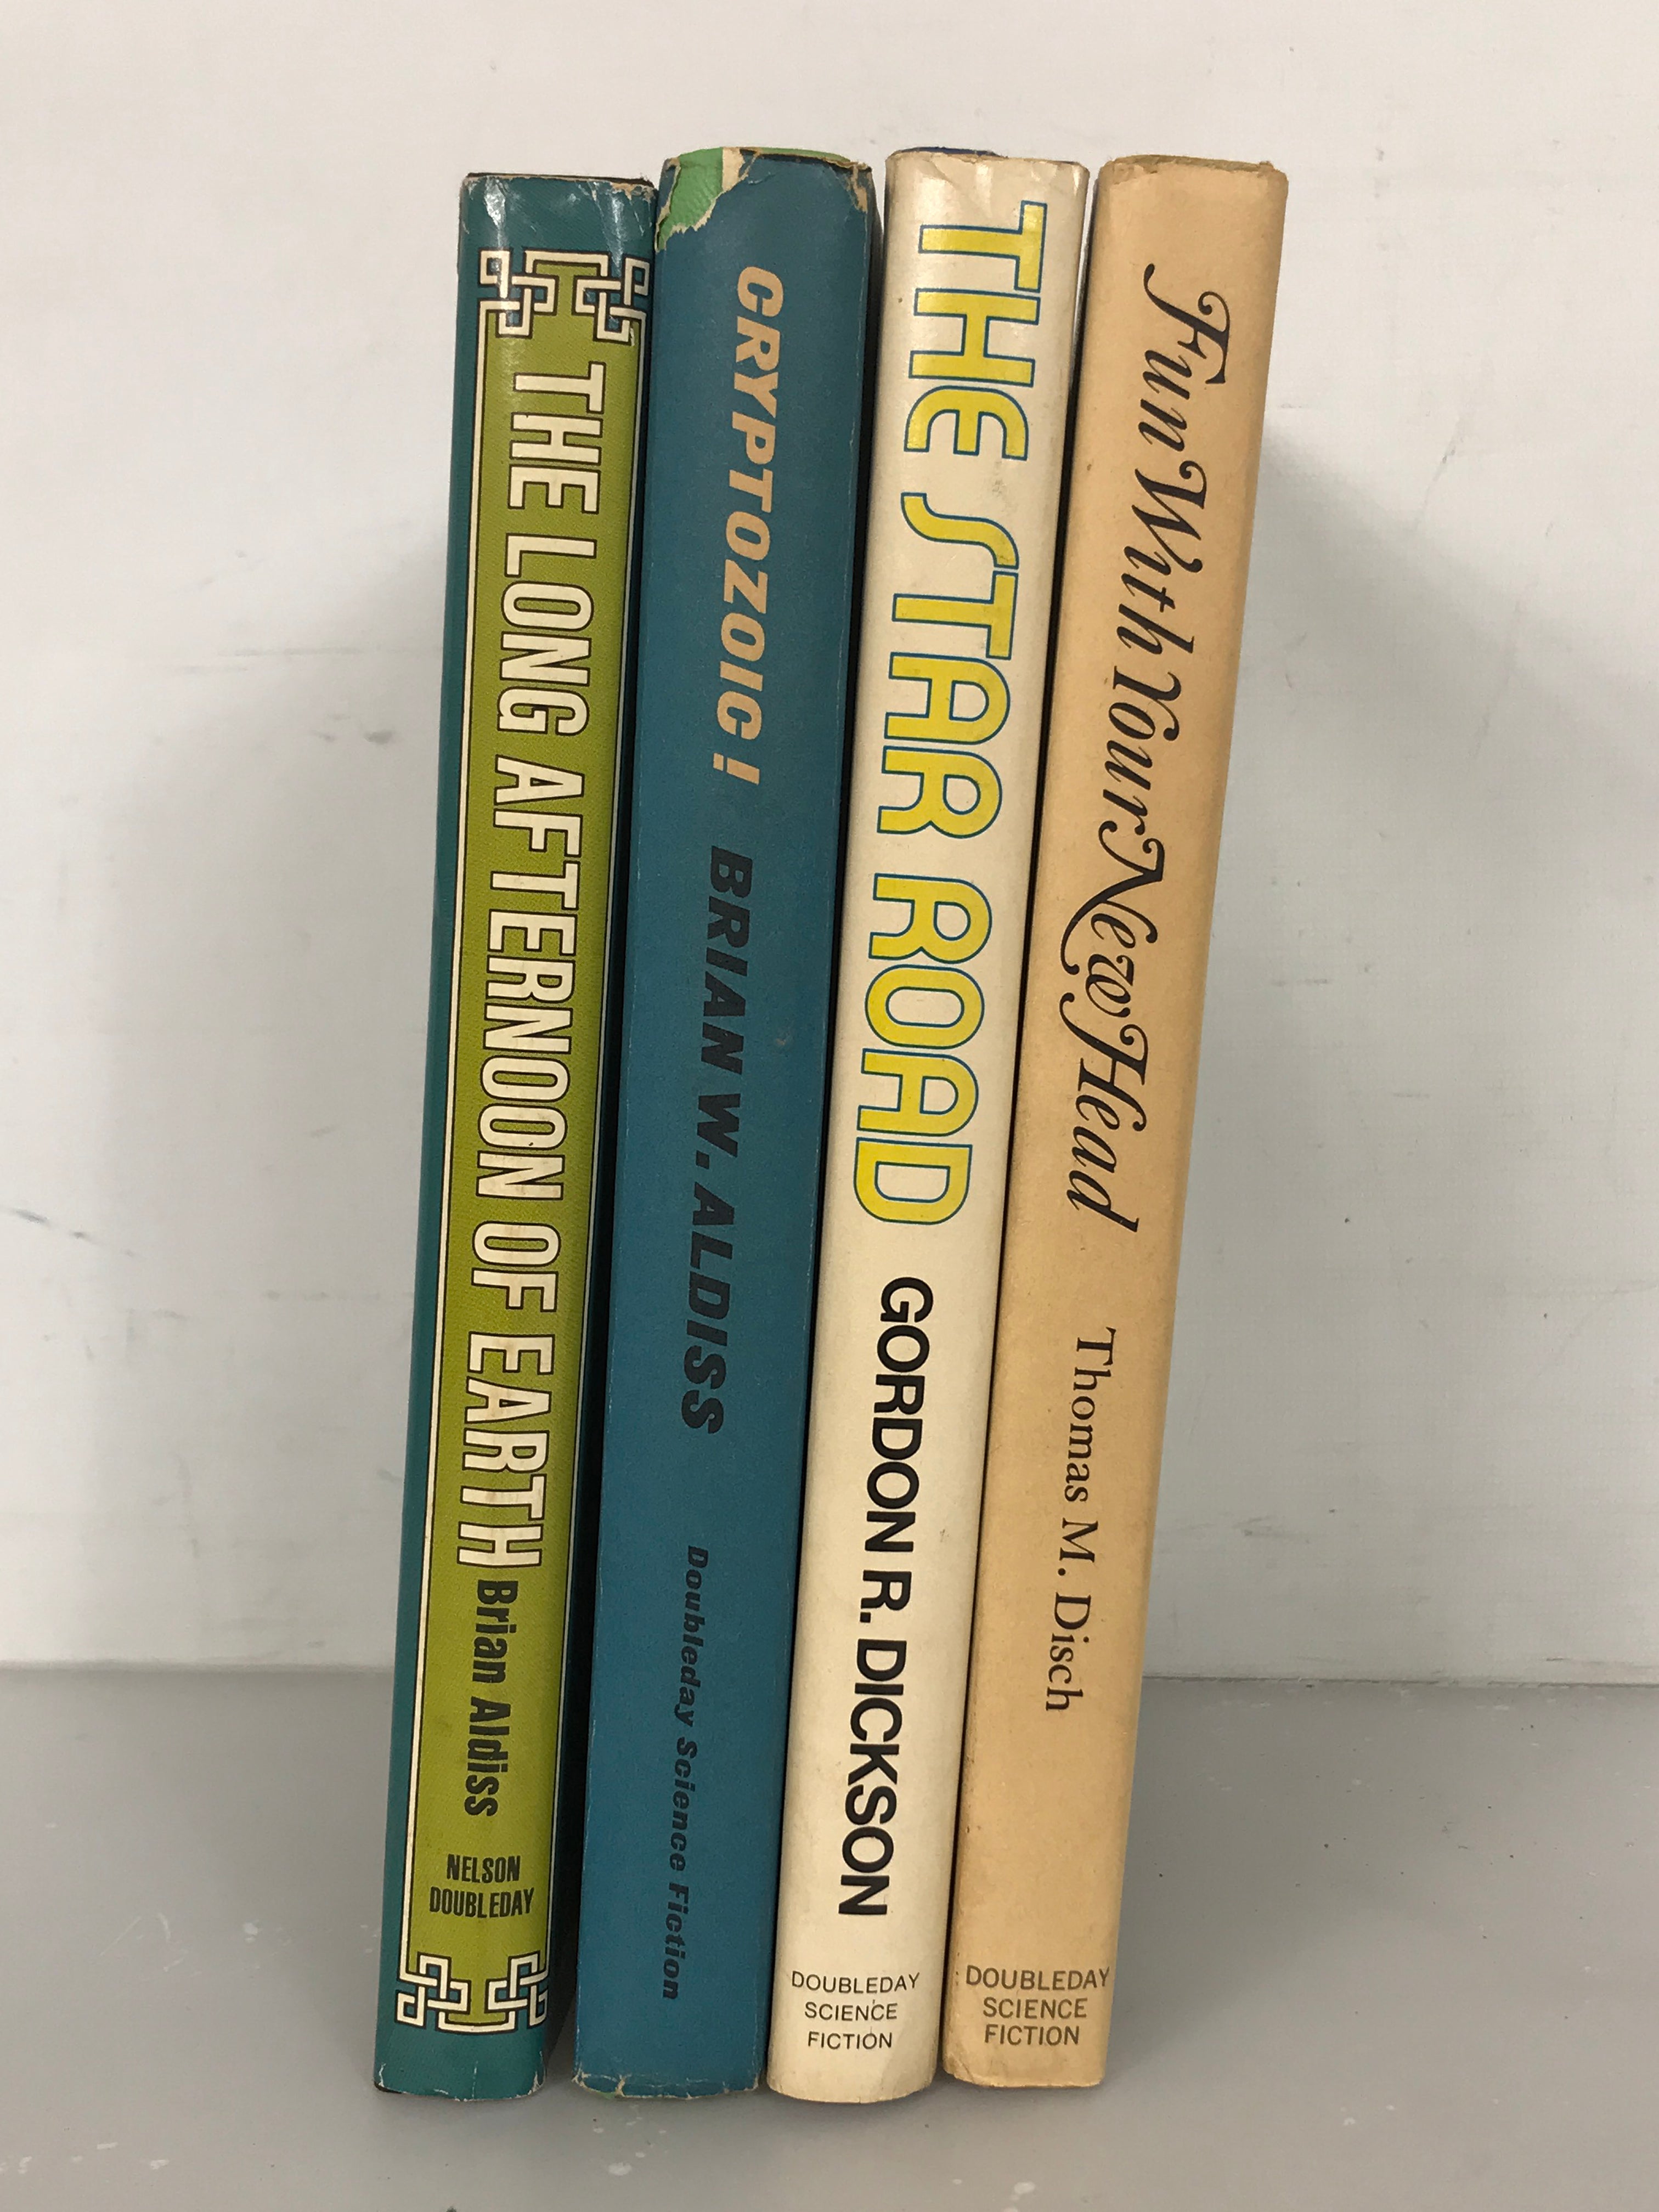 Lot of 4 BCE Science Fiction Books: Fun With Your New Head (1968), The Star Road (1973), Cryptozoic! (1967), and The Long Afternoon of Earth (1961) HC DJ